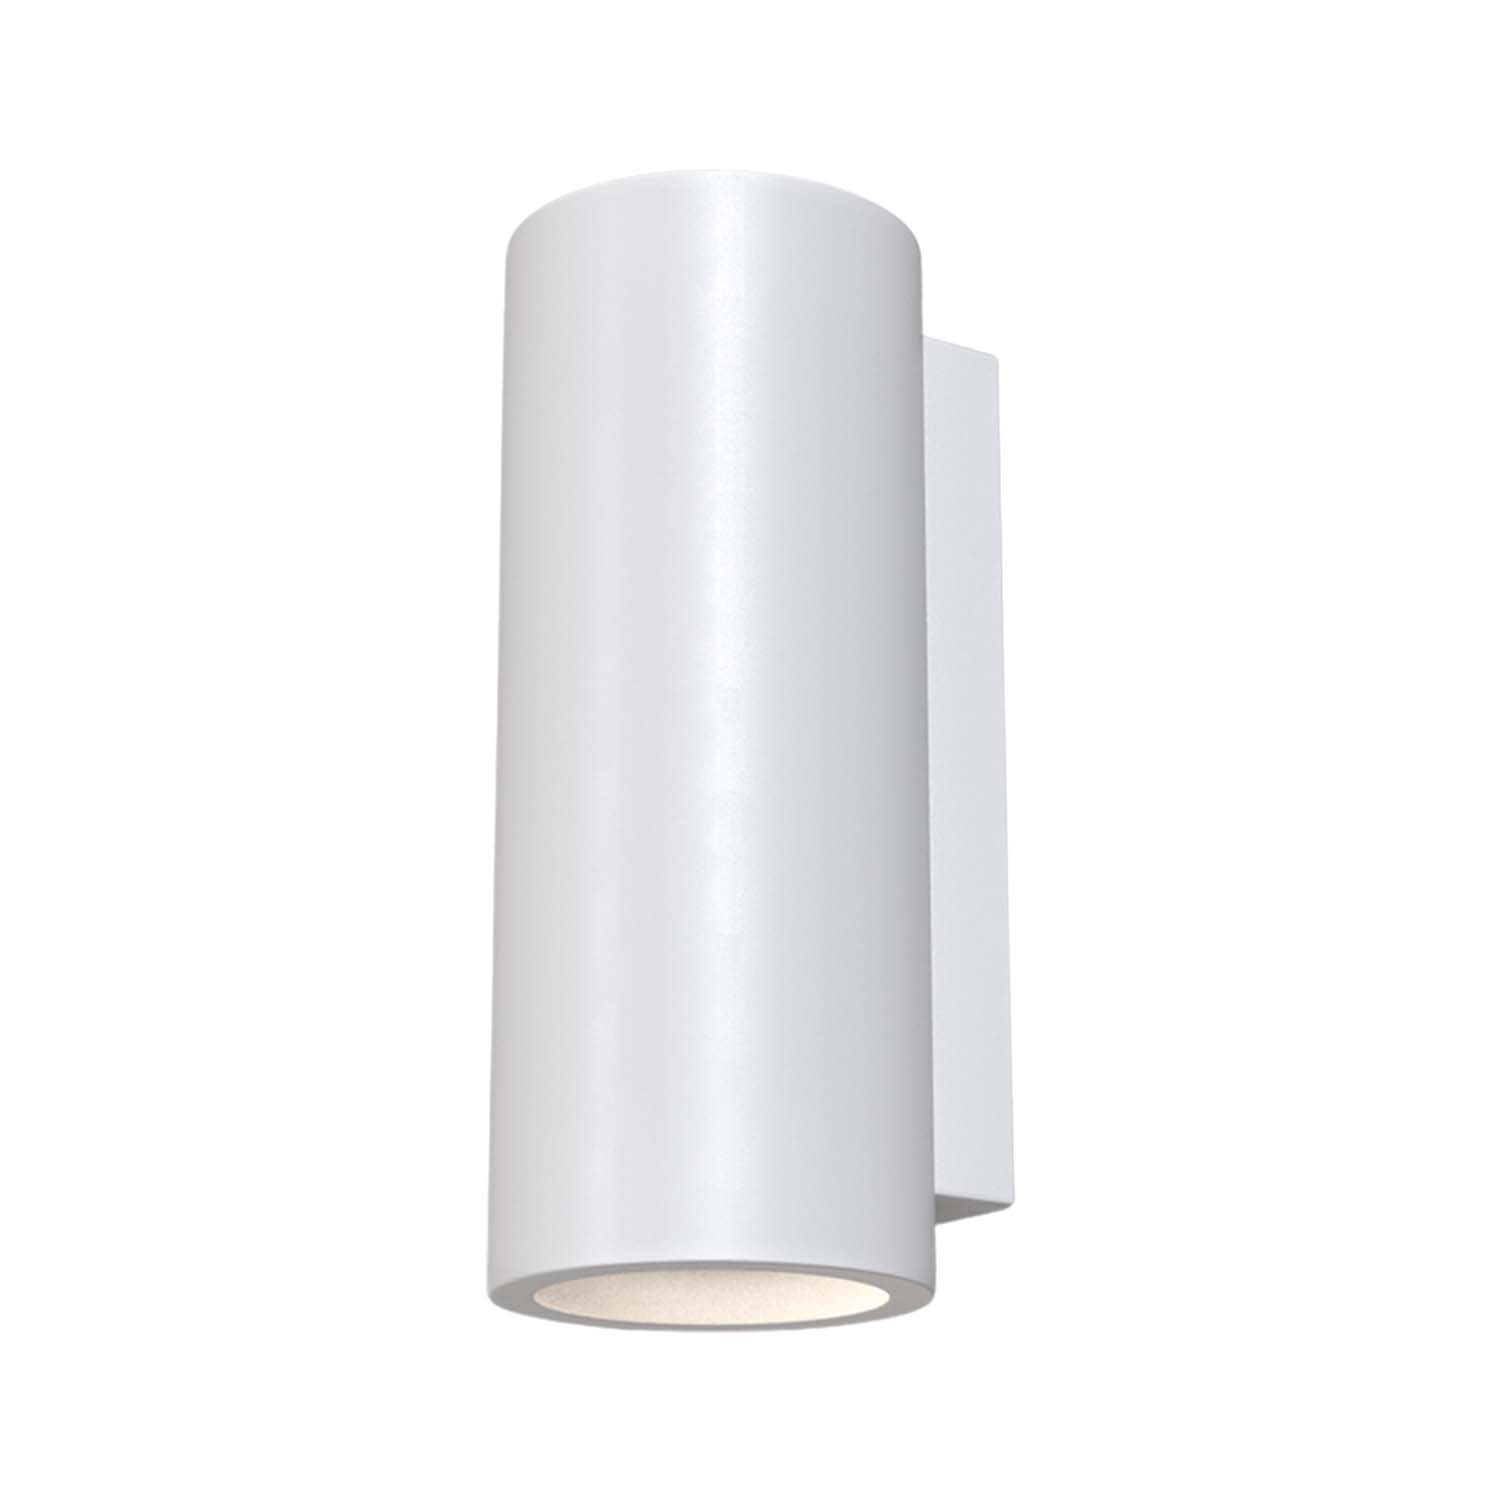 PARMA - Cylindrical plaster wall light to paint